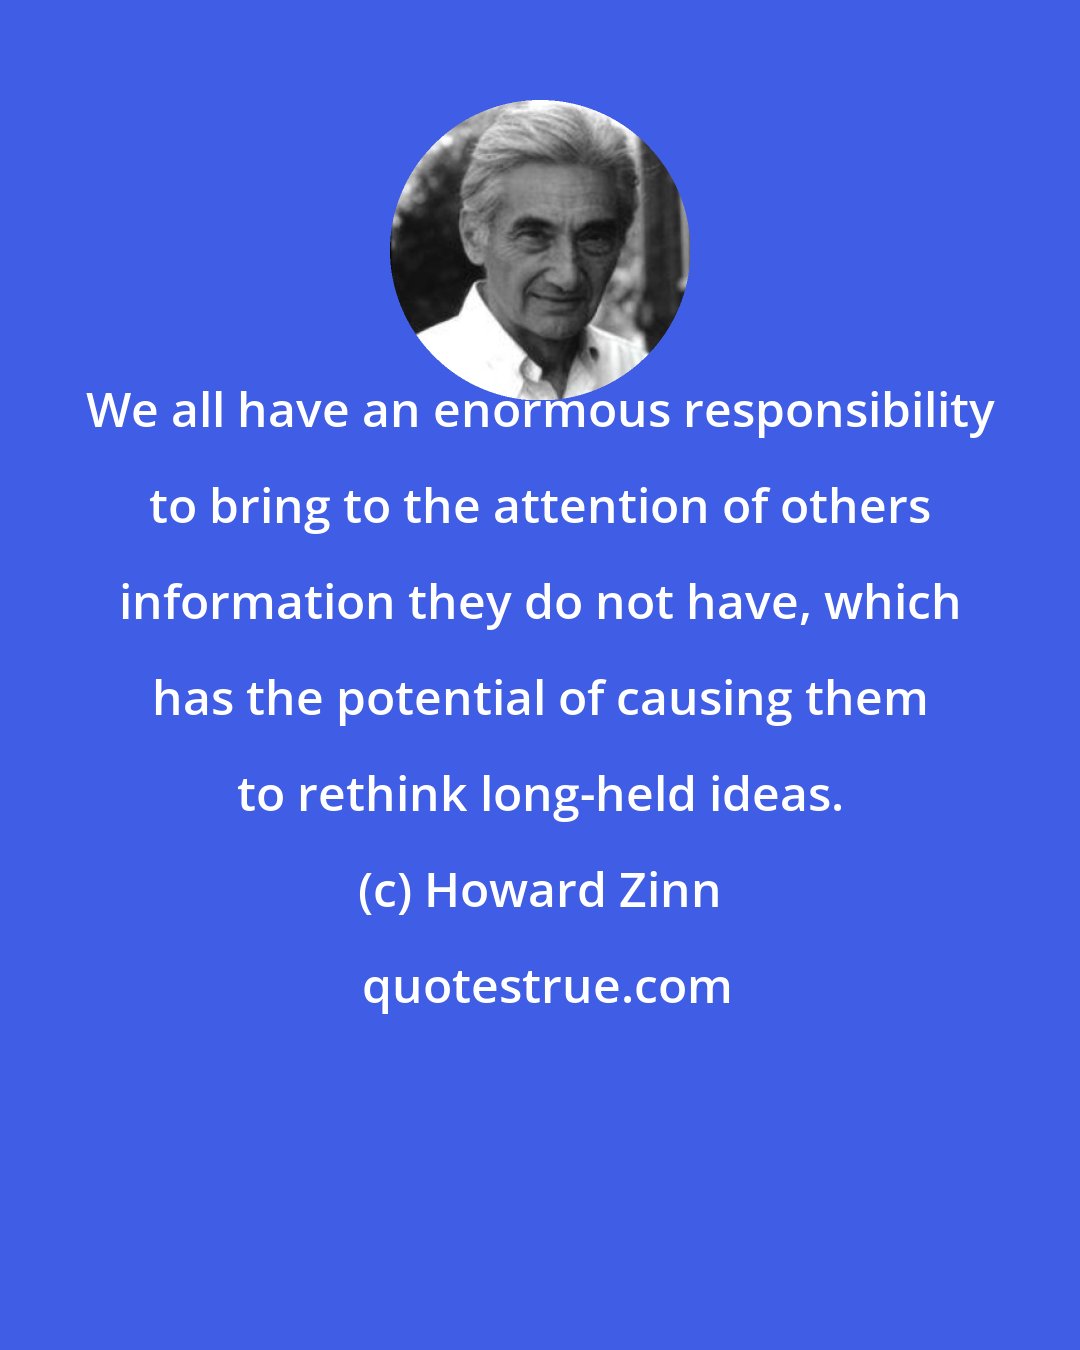 Howard Zinn: We all have an enormous responsibility to bring to the attention of others information they do not have, which has the potential of causing them to rethink long-held ideas.